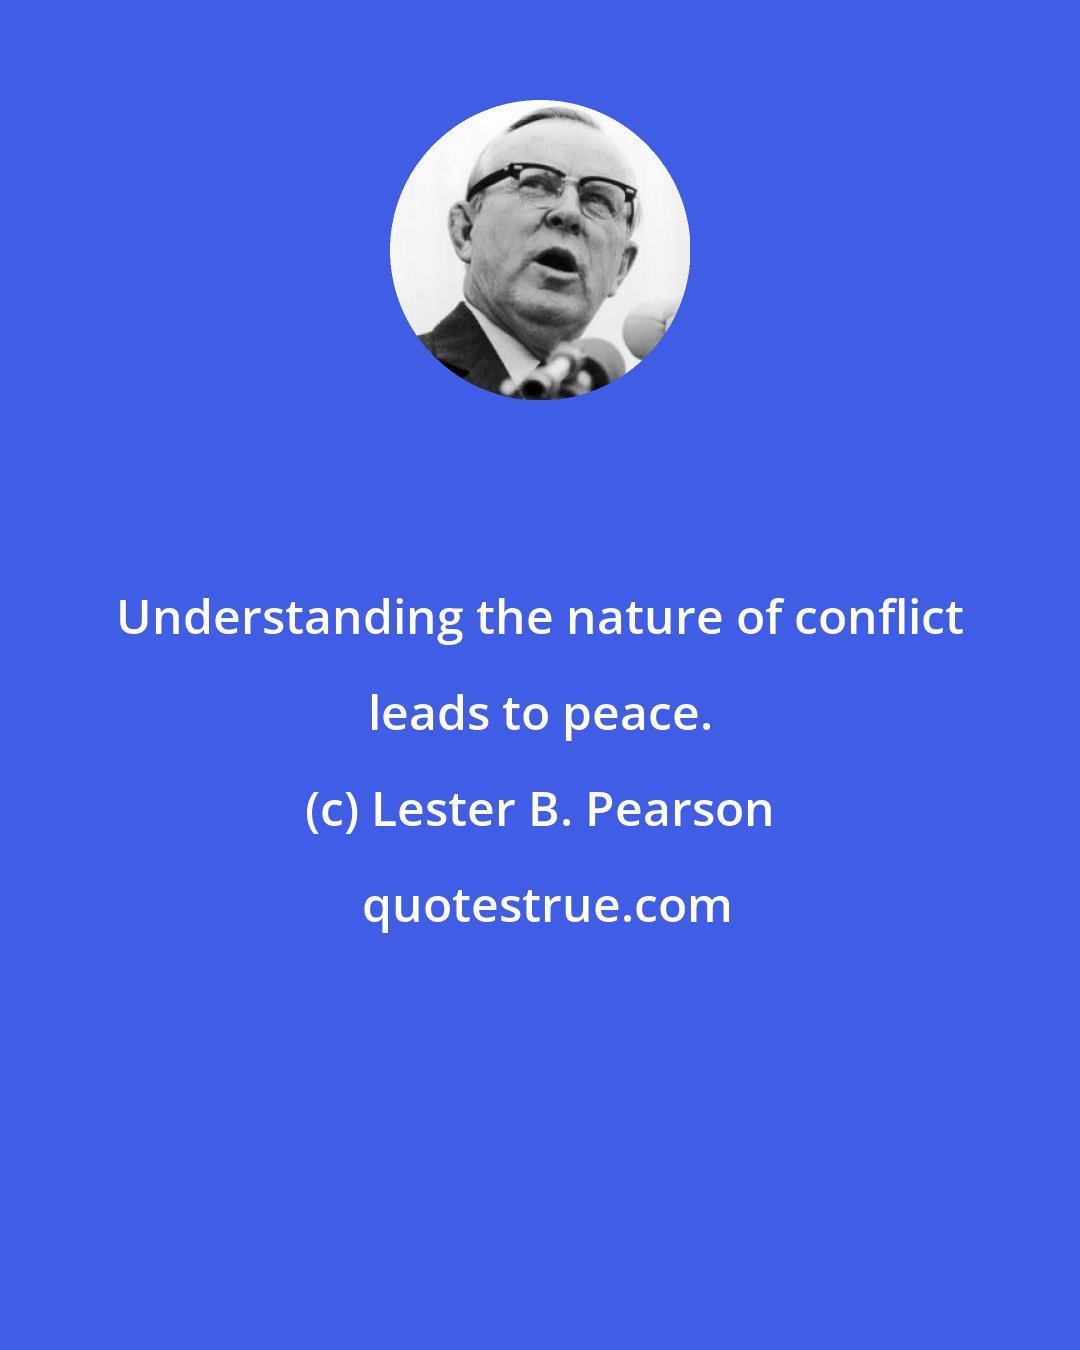 Lester B. Pearson: Understanding the nature of conflict leads to peace.